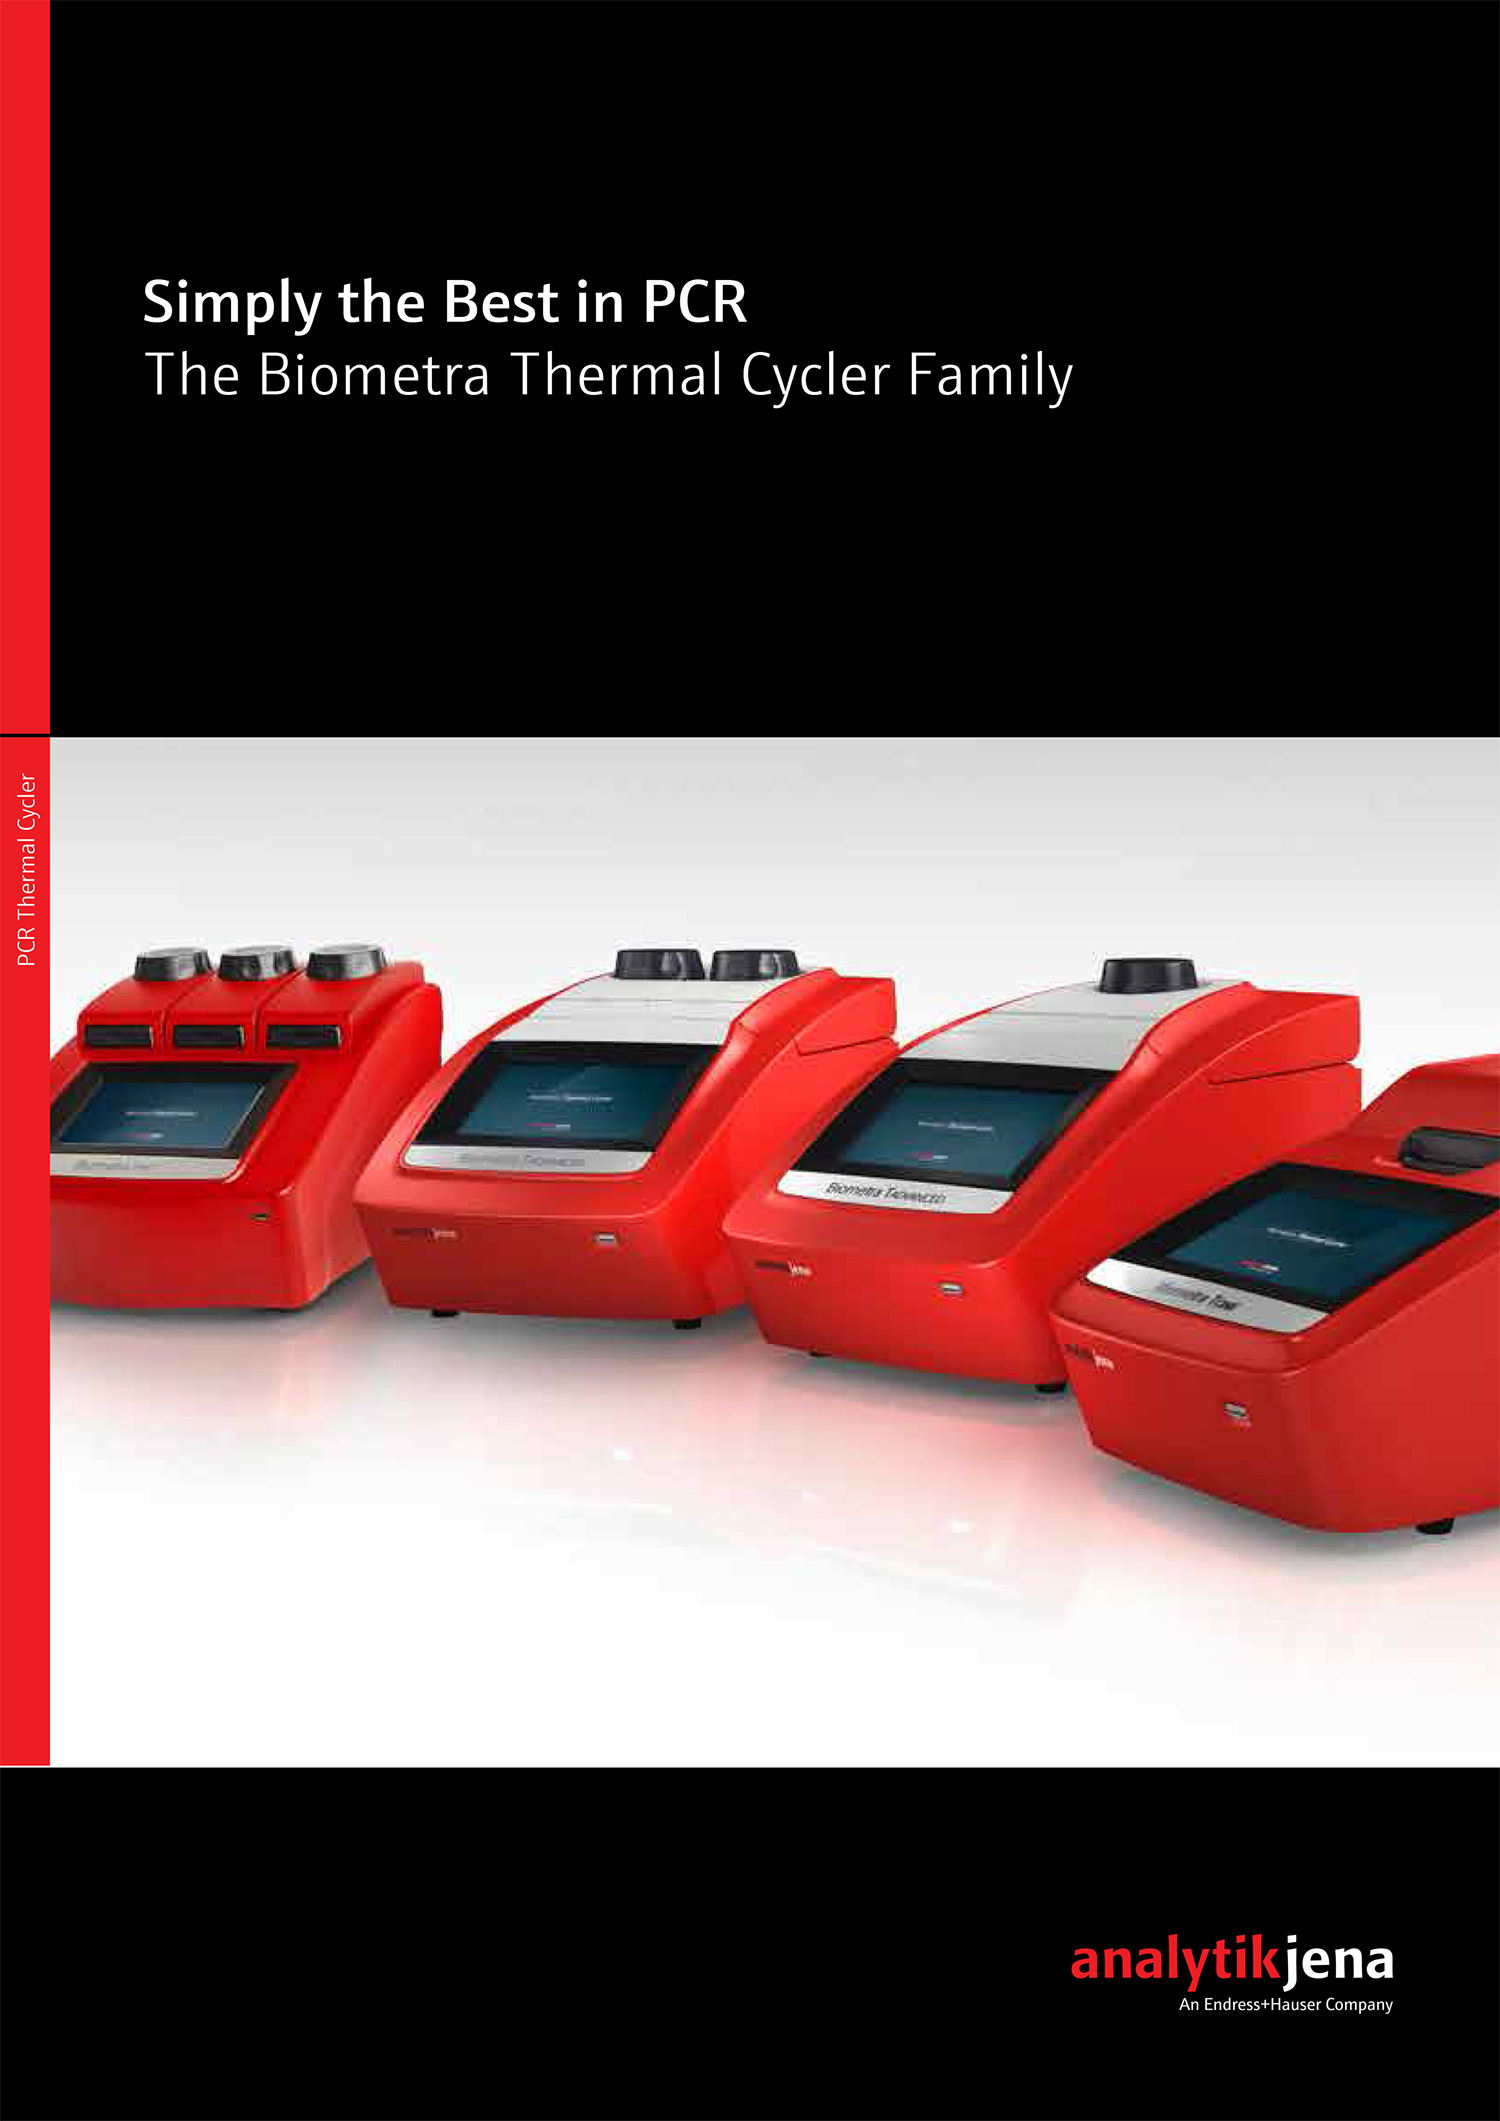 The Biometra Thermal Cycler Family